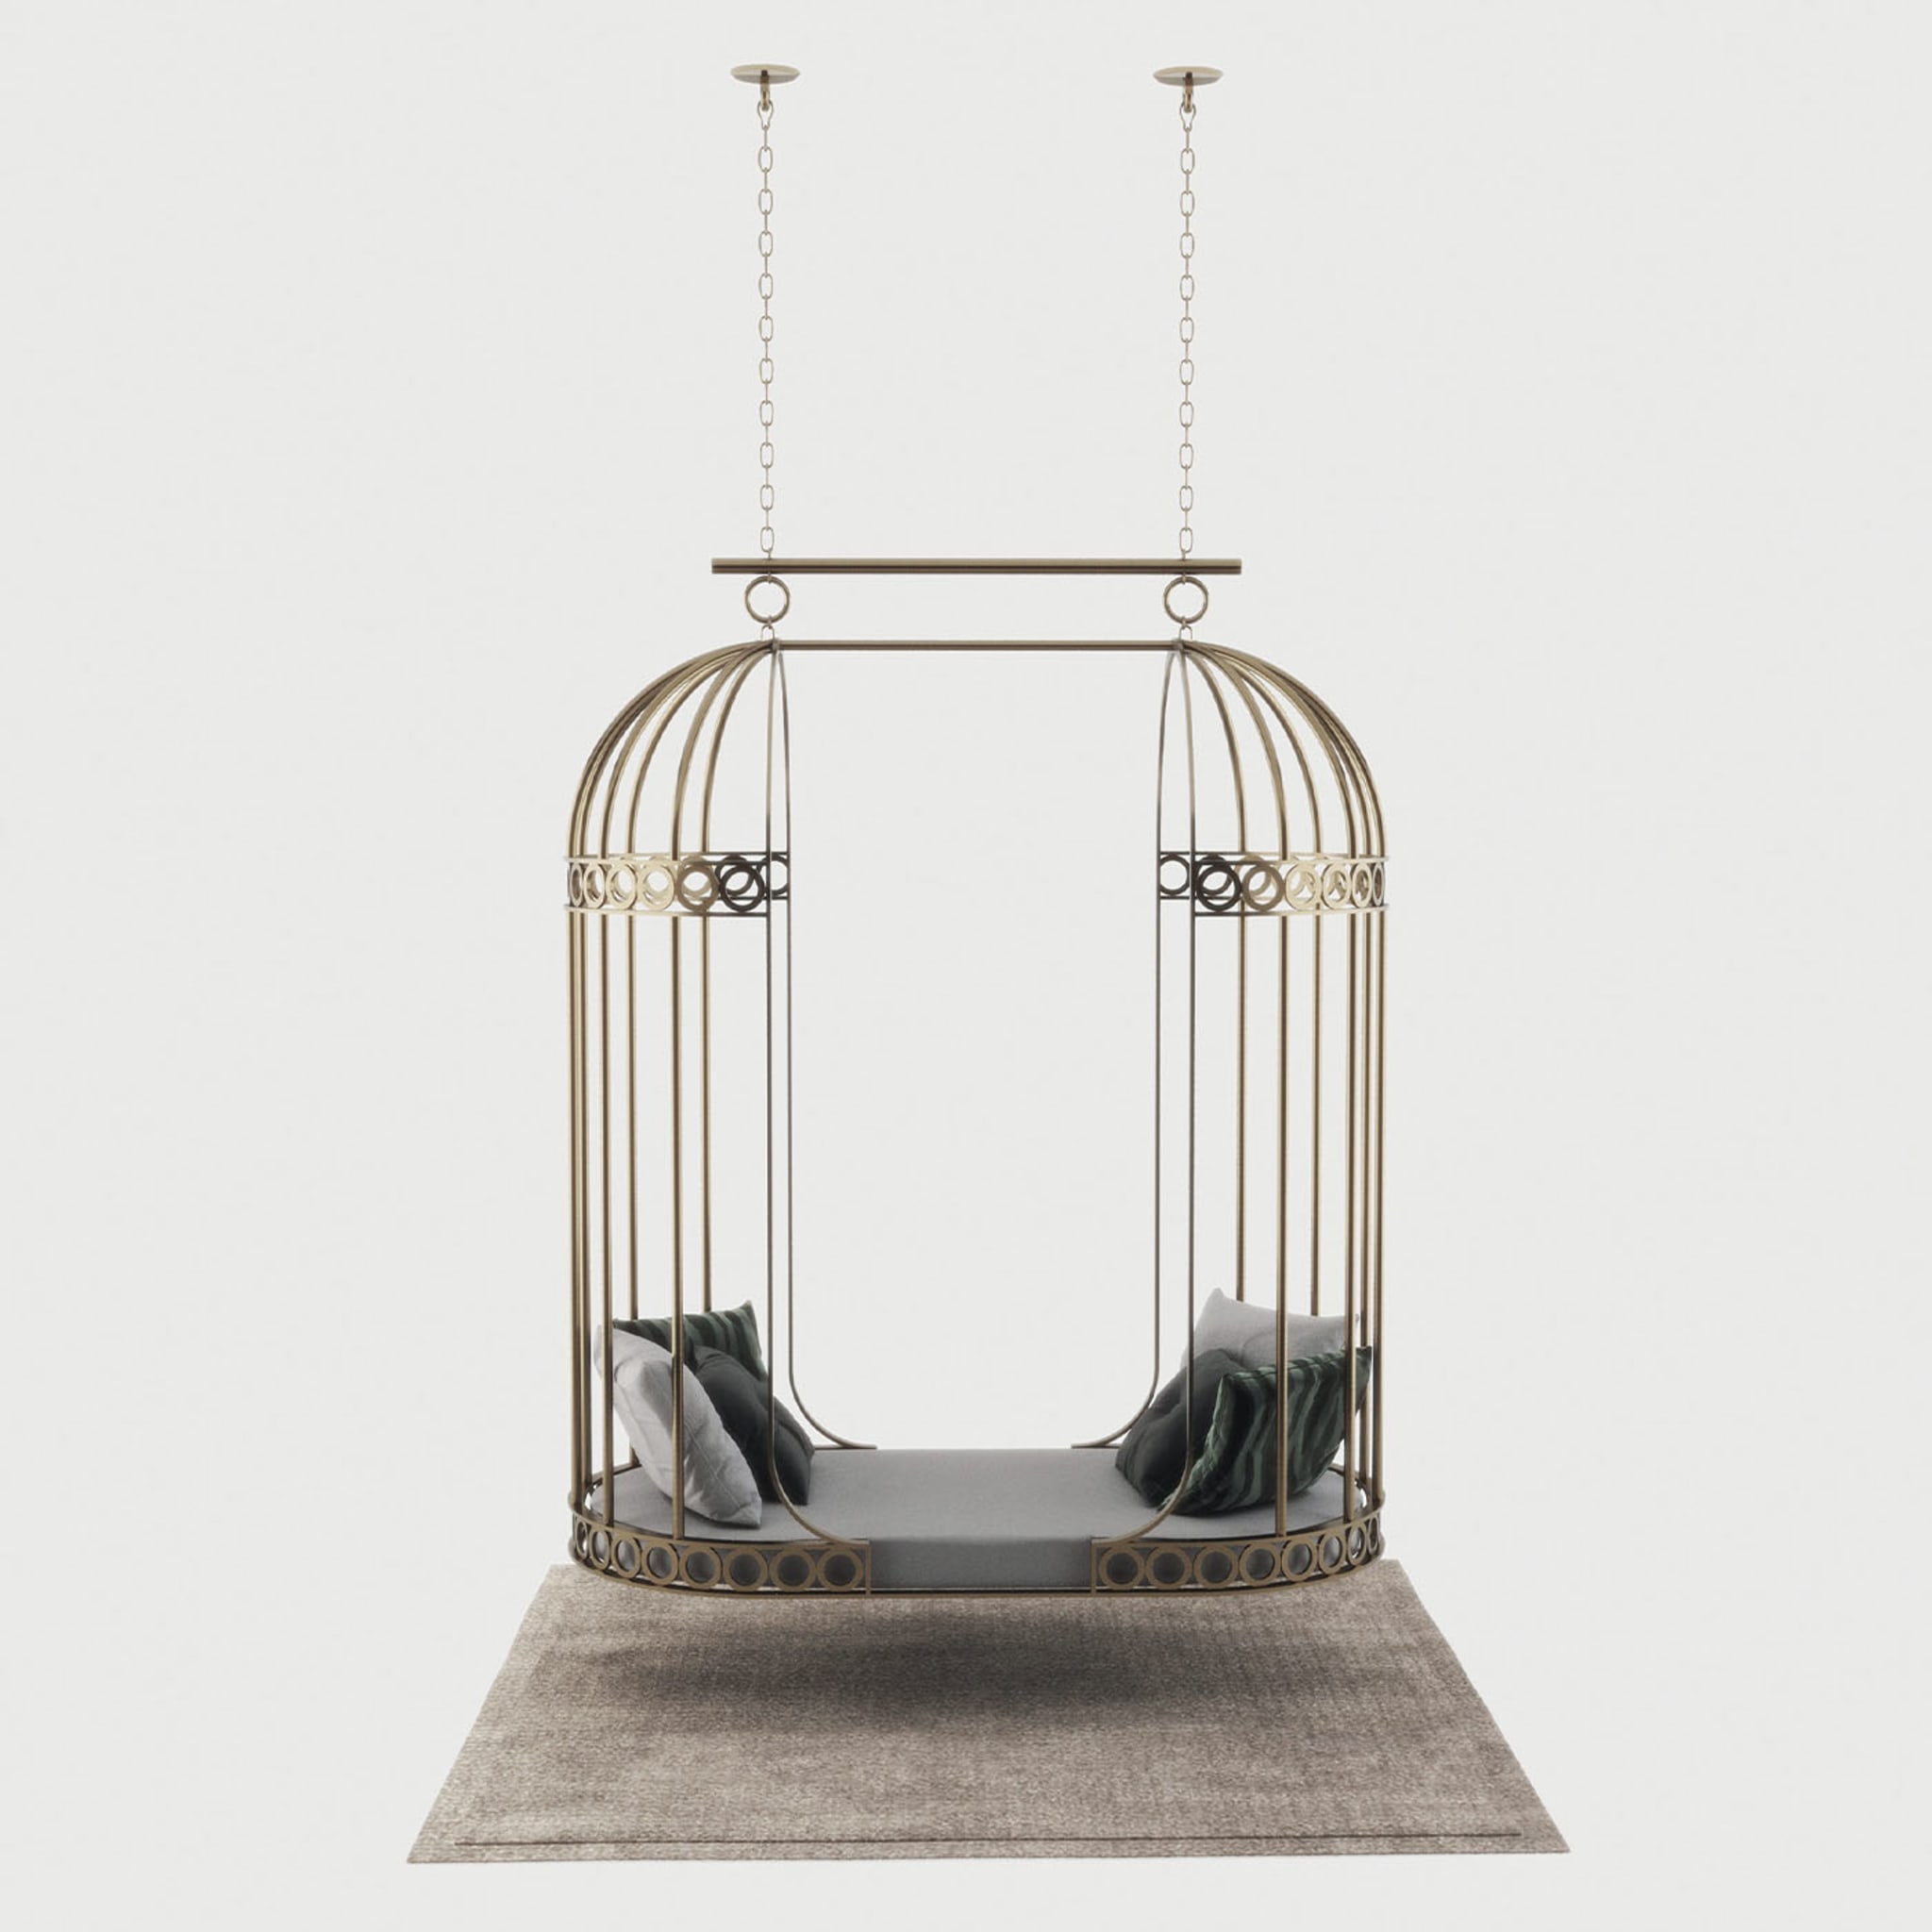 Double Swing Suspended Sofa - Alternative view 2